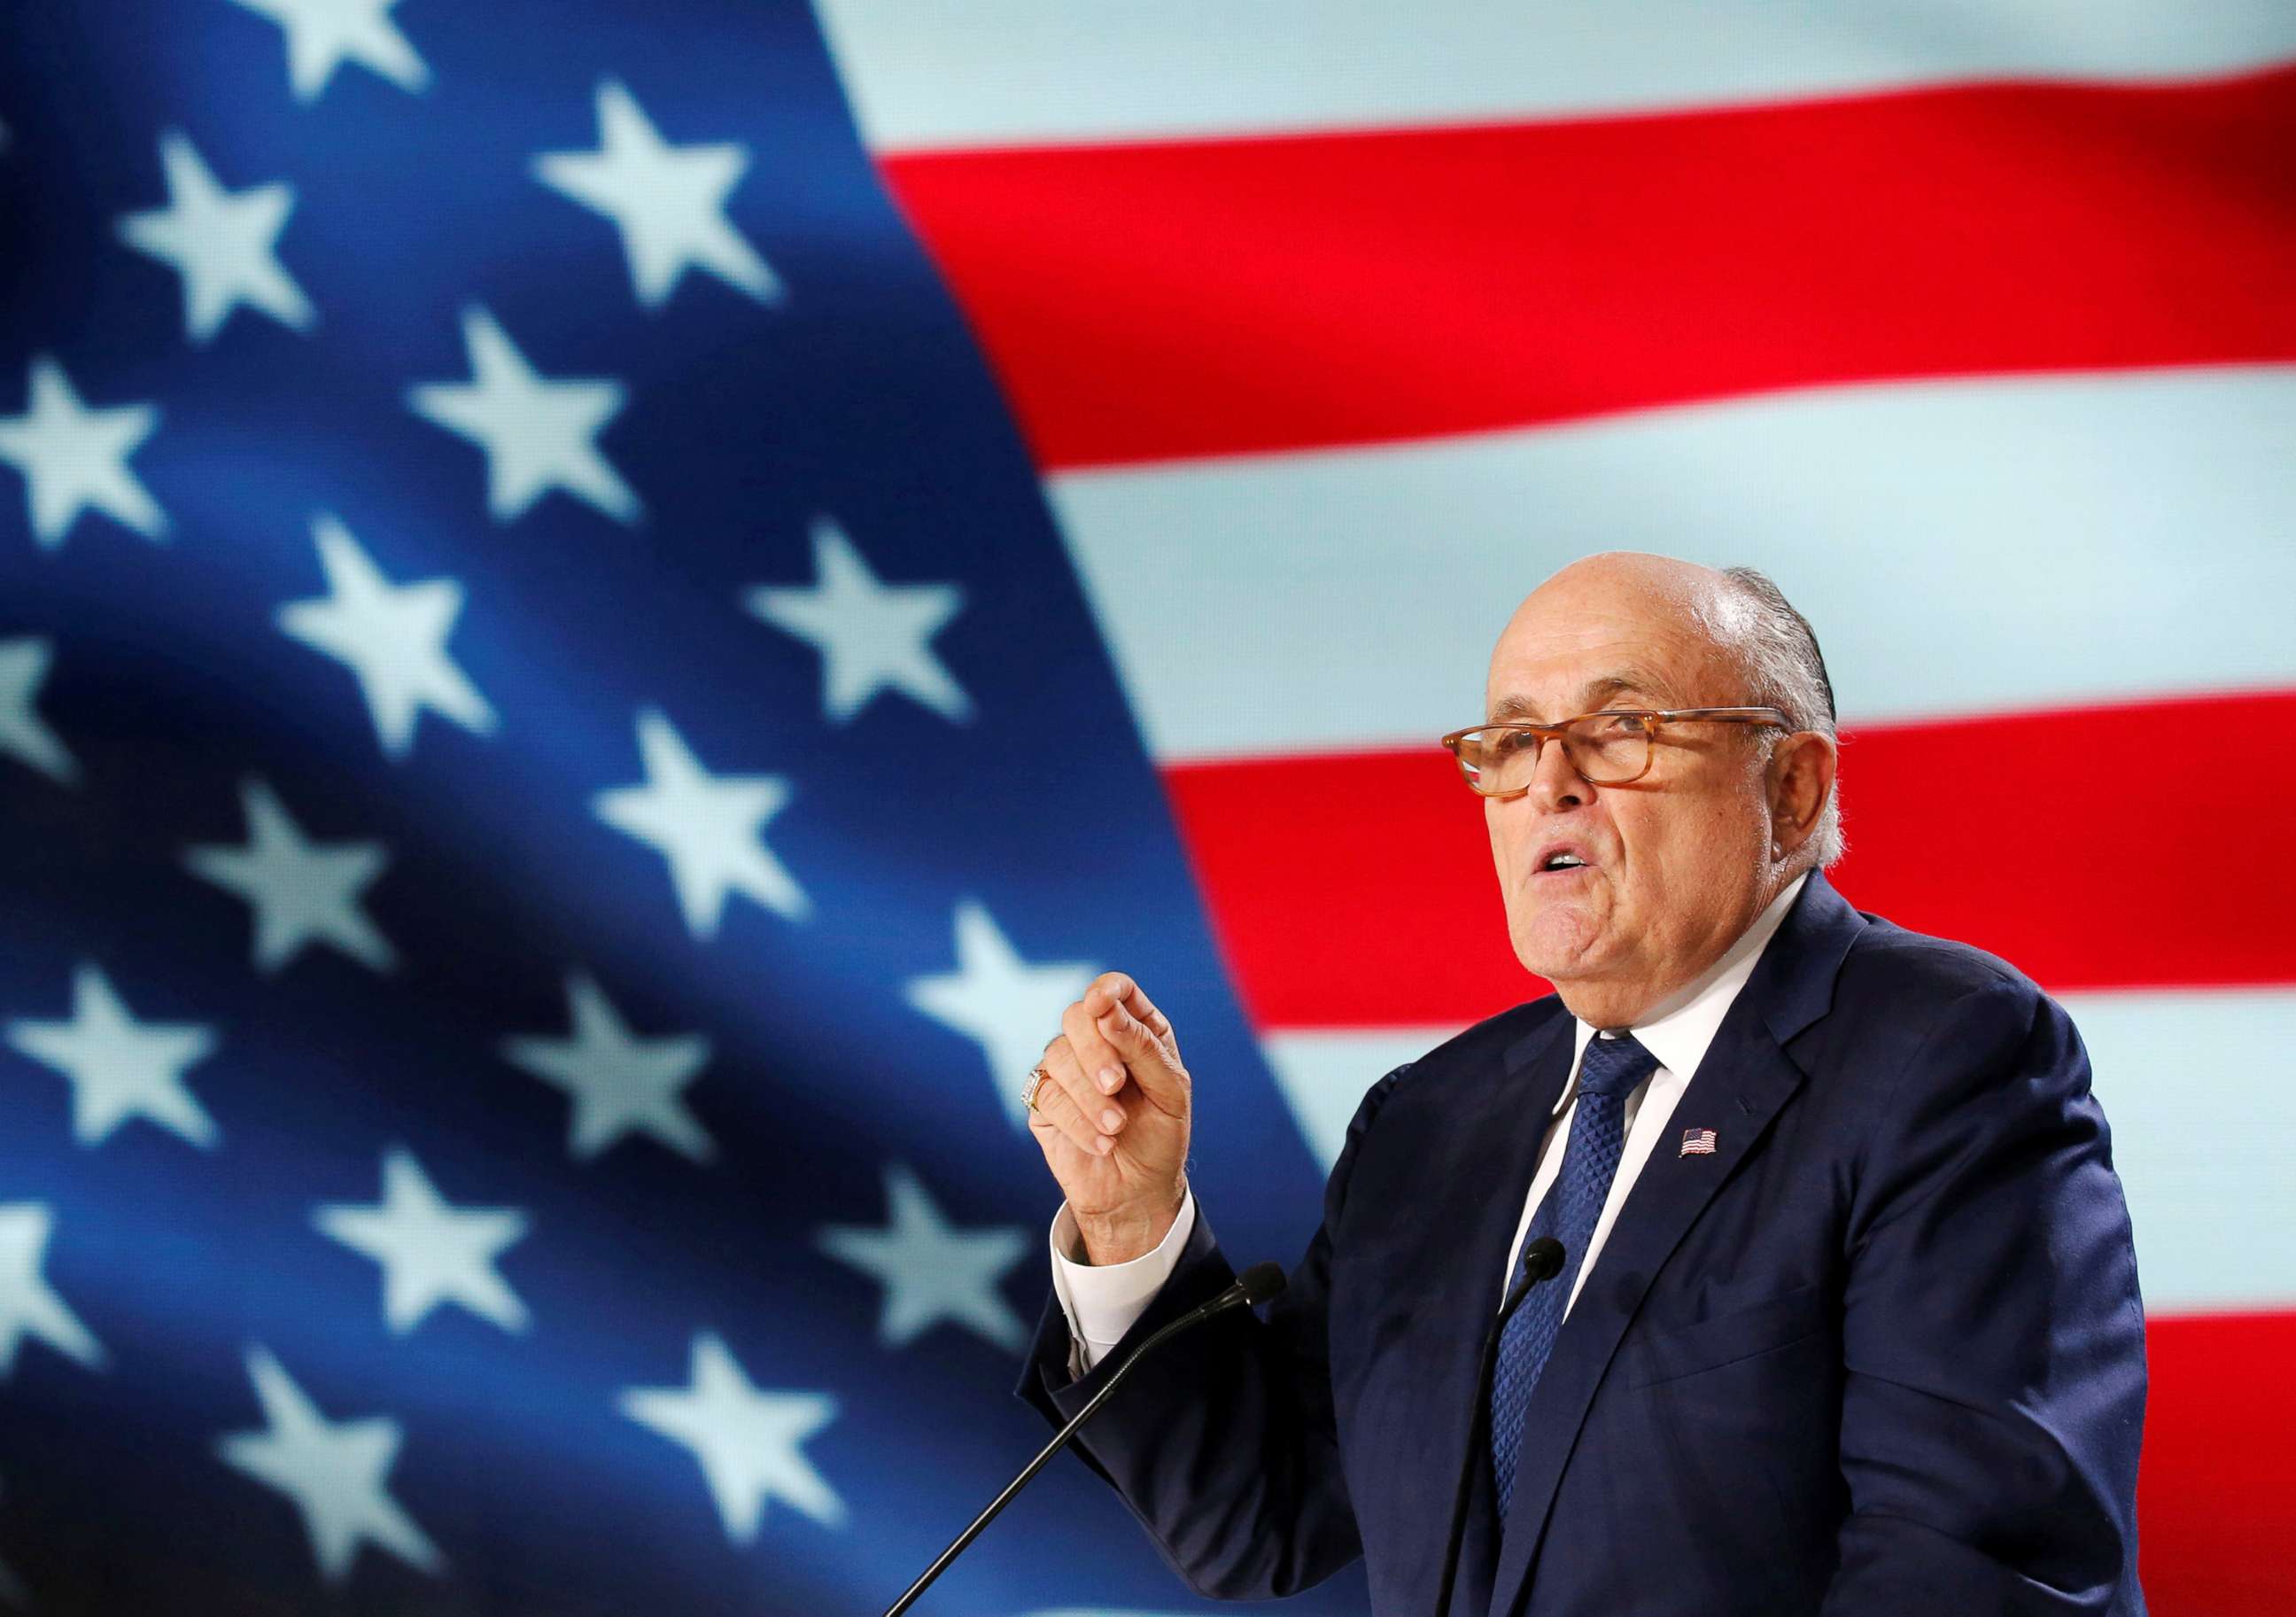 PHOTO: Rudy Giuliani delivers his speech as he attends the National Council of Resistance of Iran (NCRI) meeting in Villepinte, near Paris, France, June 30, 2018.